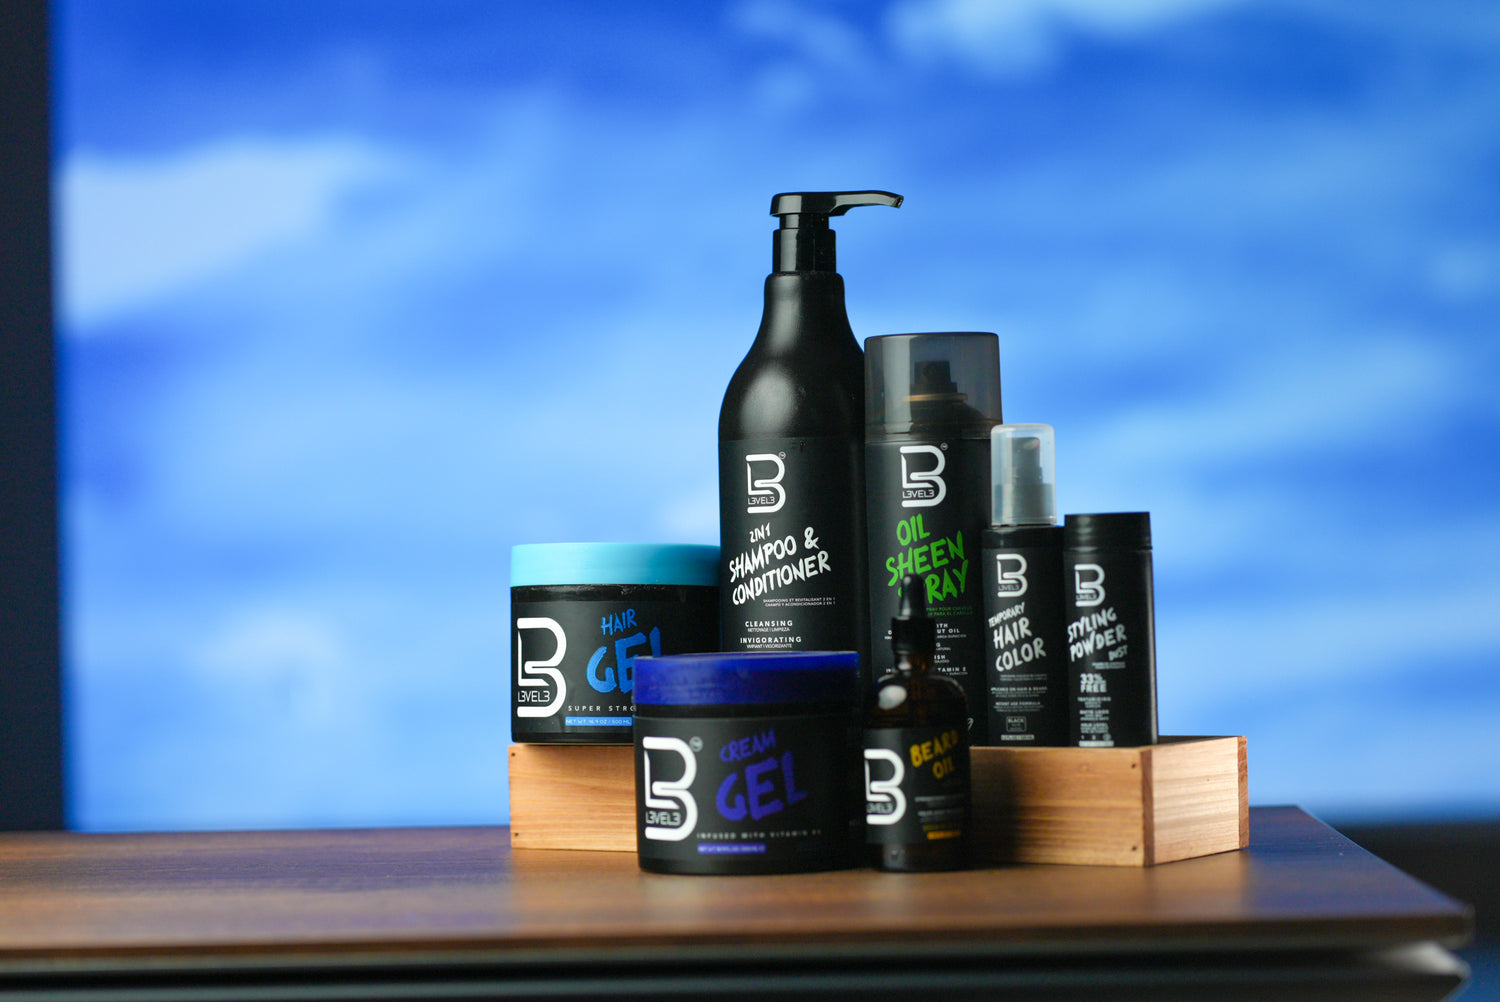 Level 3 Elite Grooming Products - Master Distributor